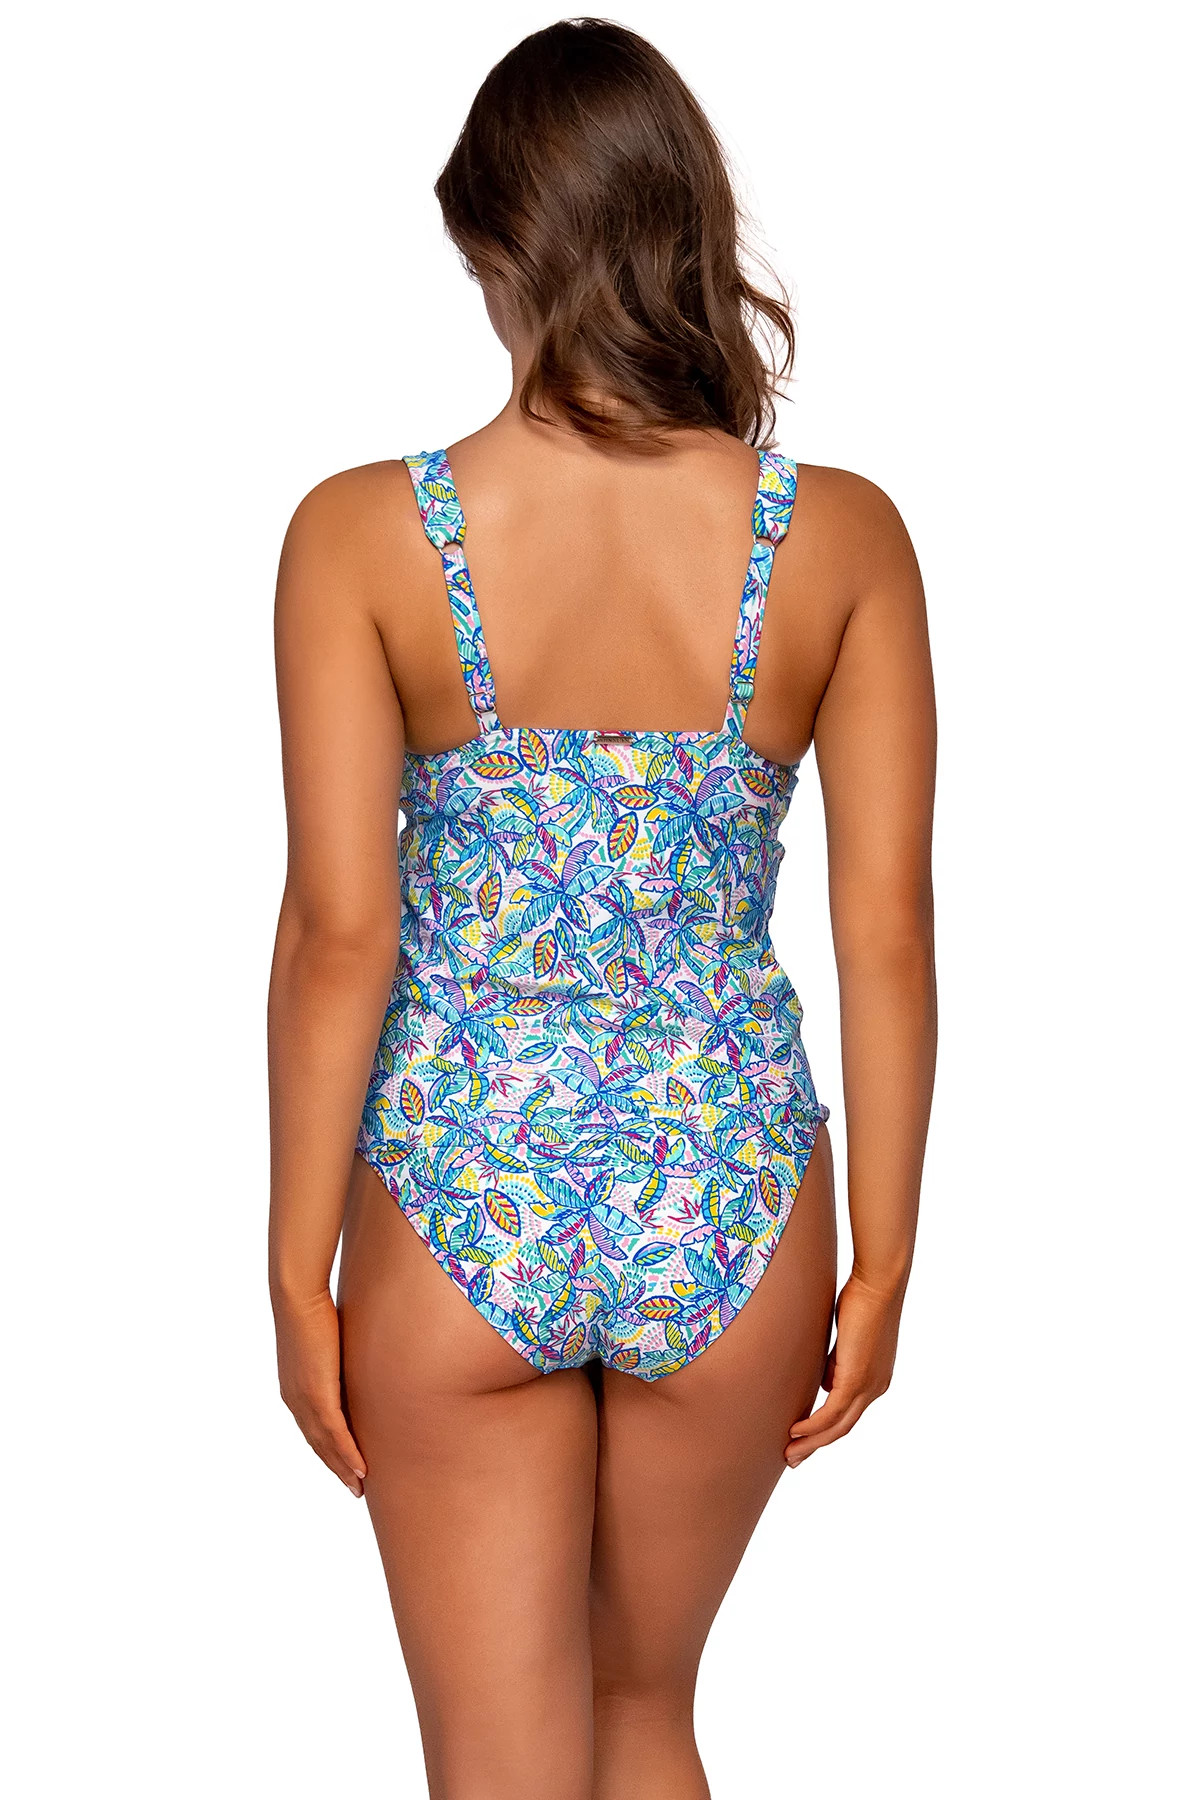 RAINBOW FALLS Elsie Underwire Tankini Top (D+ Cup) image number 2